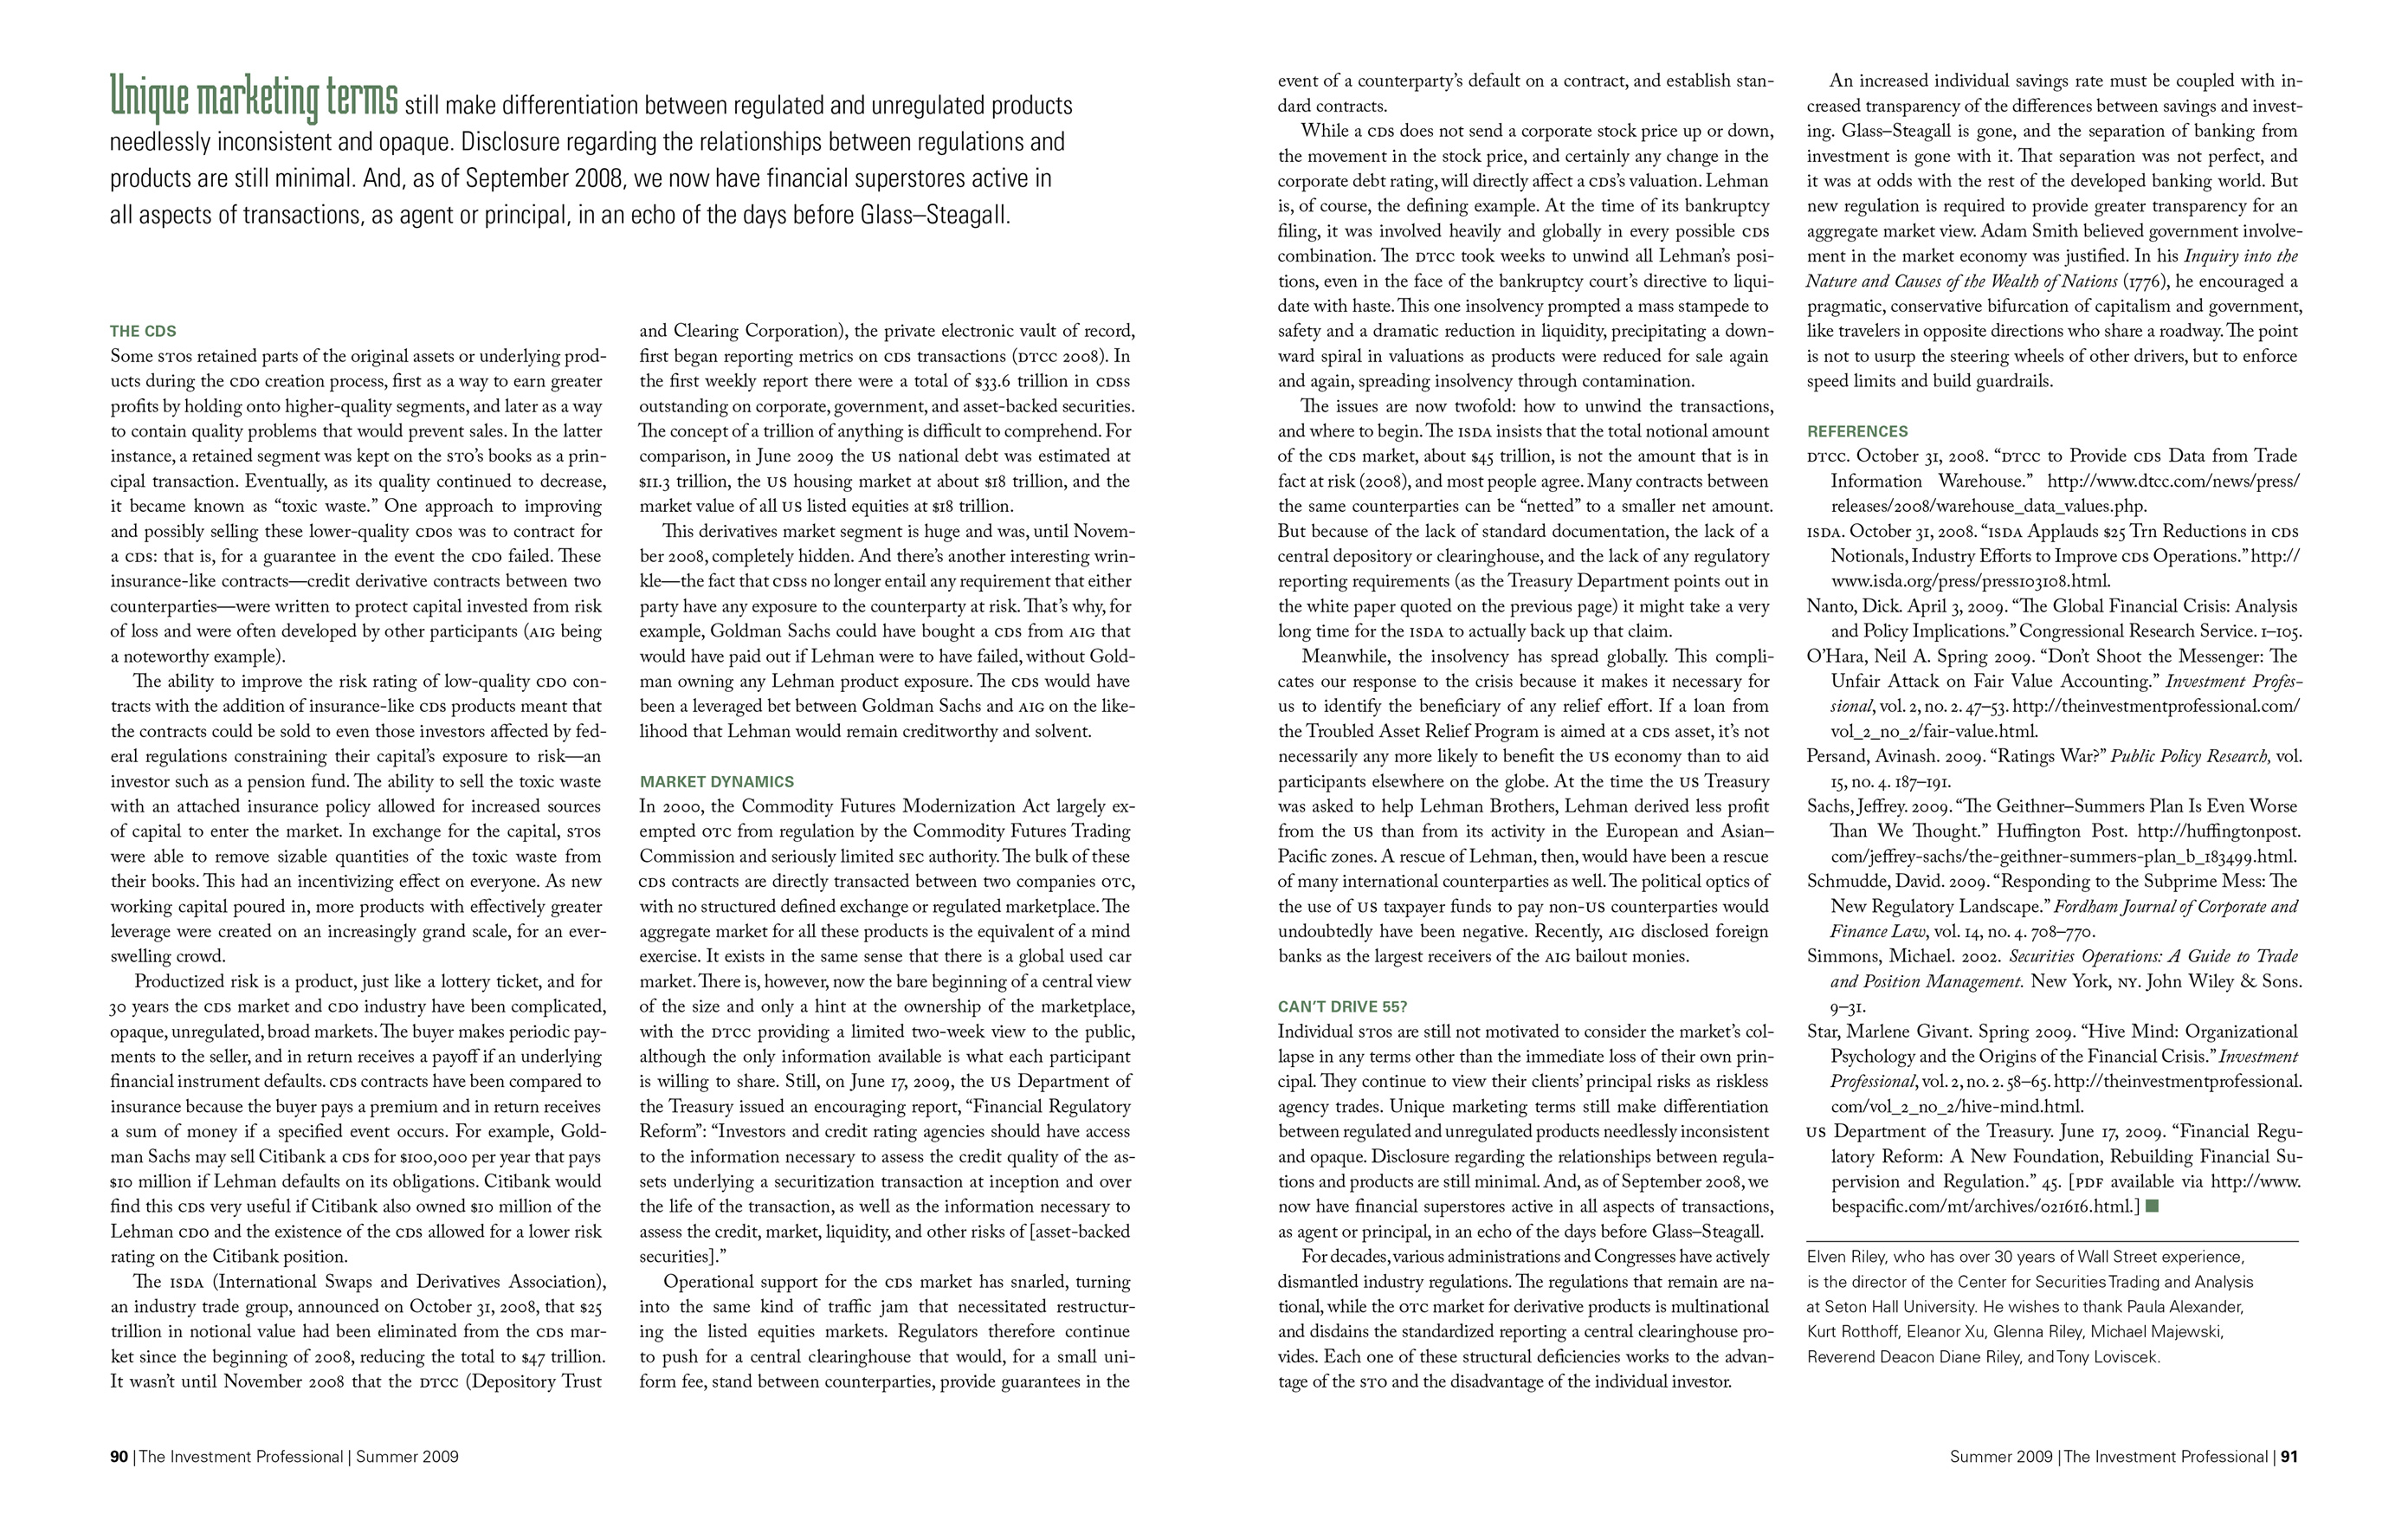 Third and final spread of the article titled 'The Place from Whence We Came.' A pull quote talks about marketing terms for regulated and unregulated products.